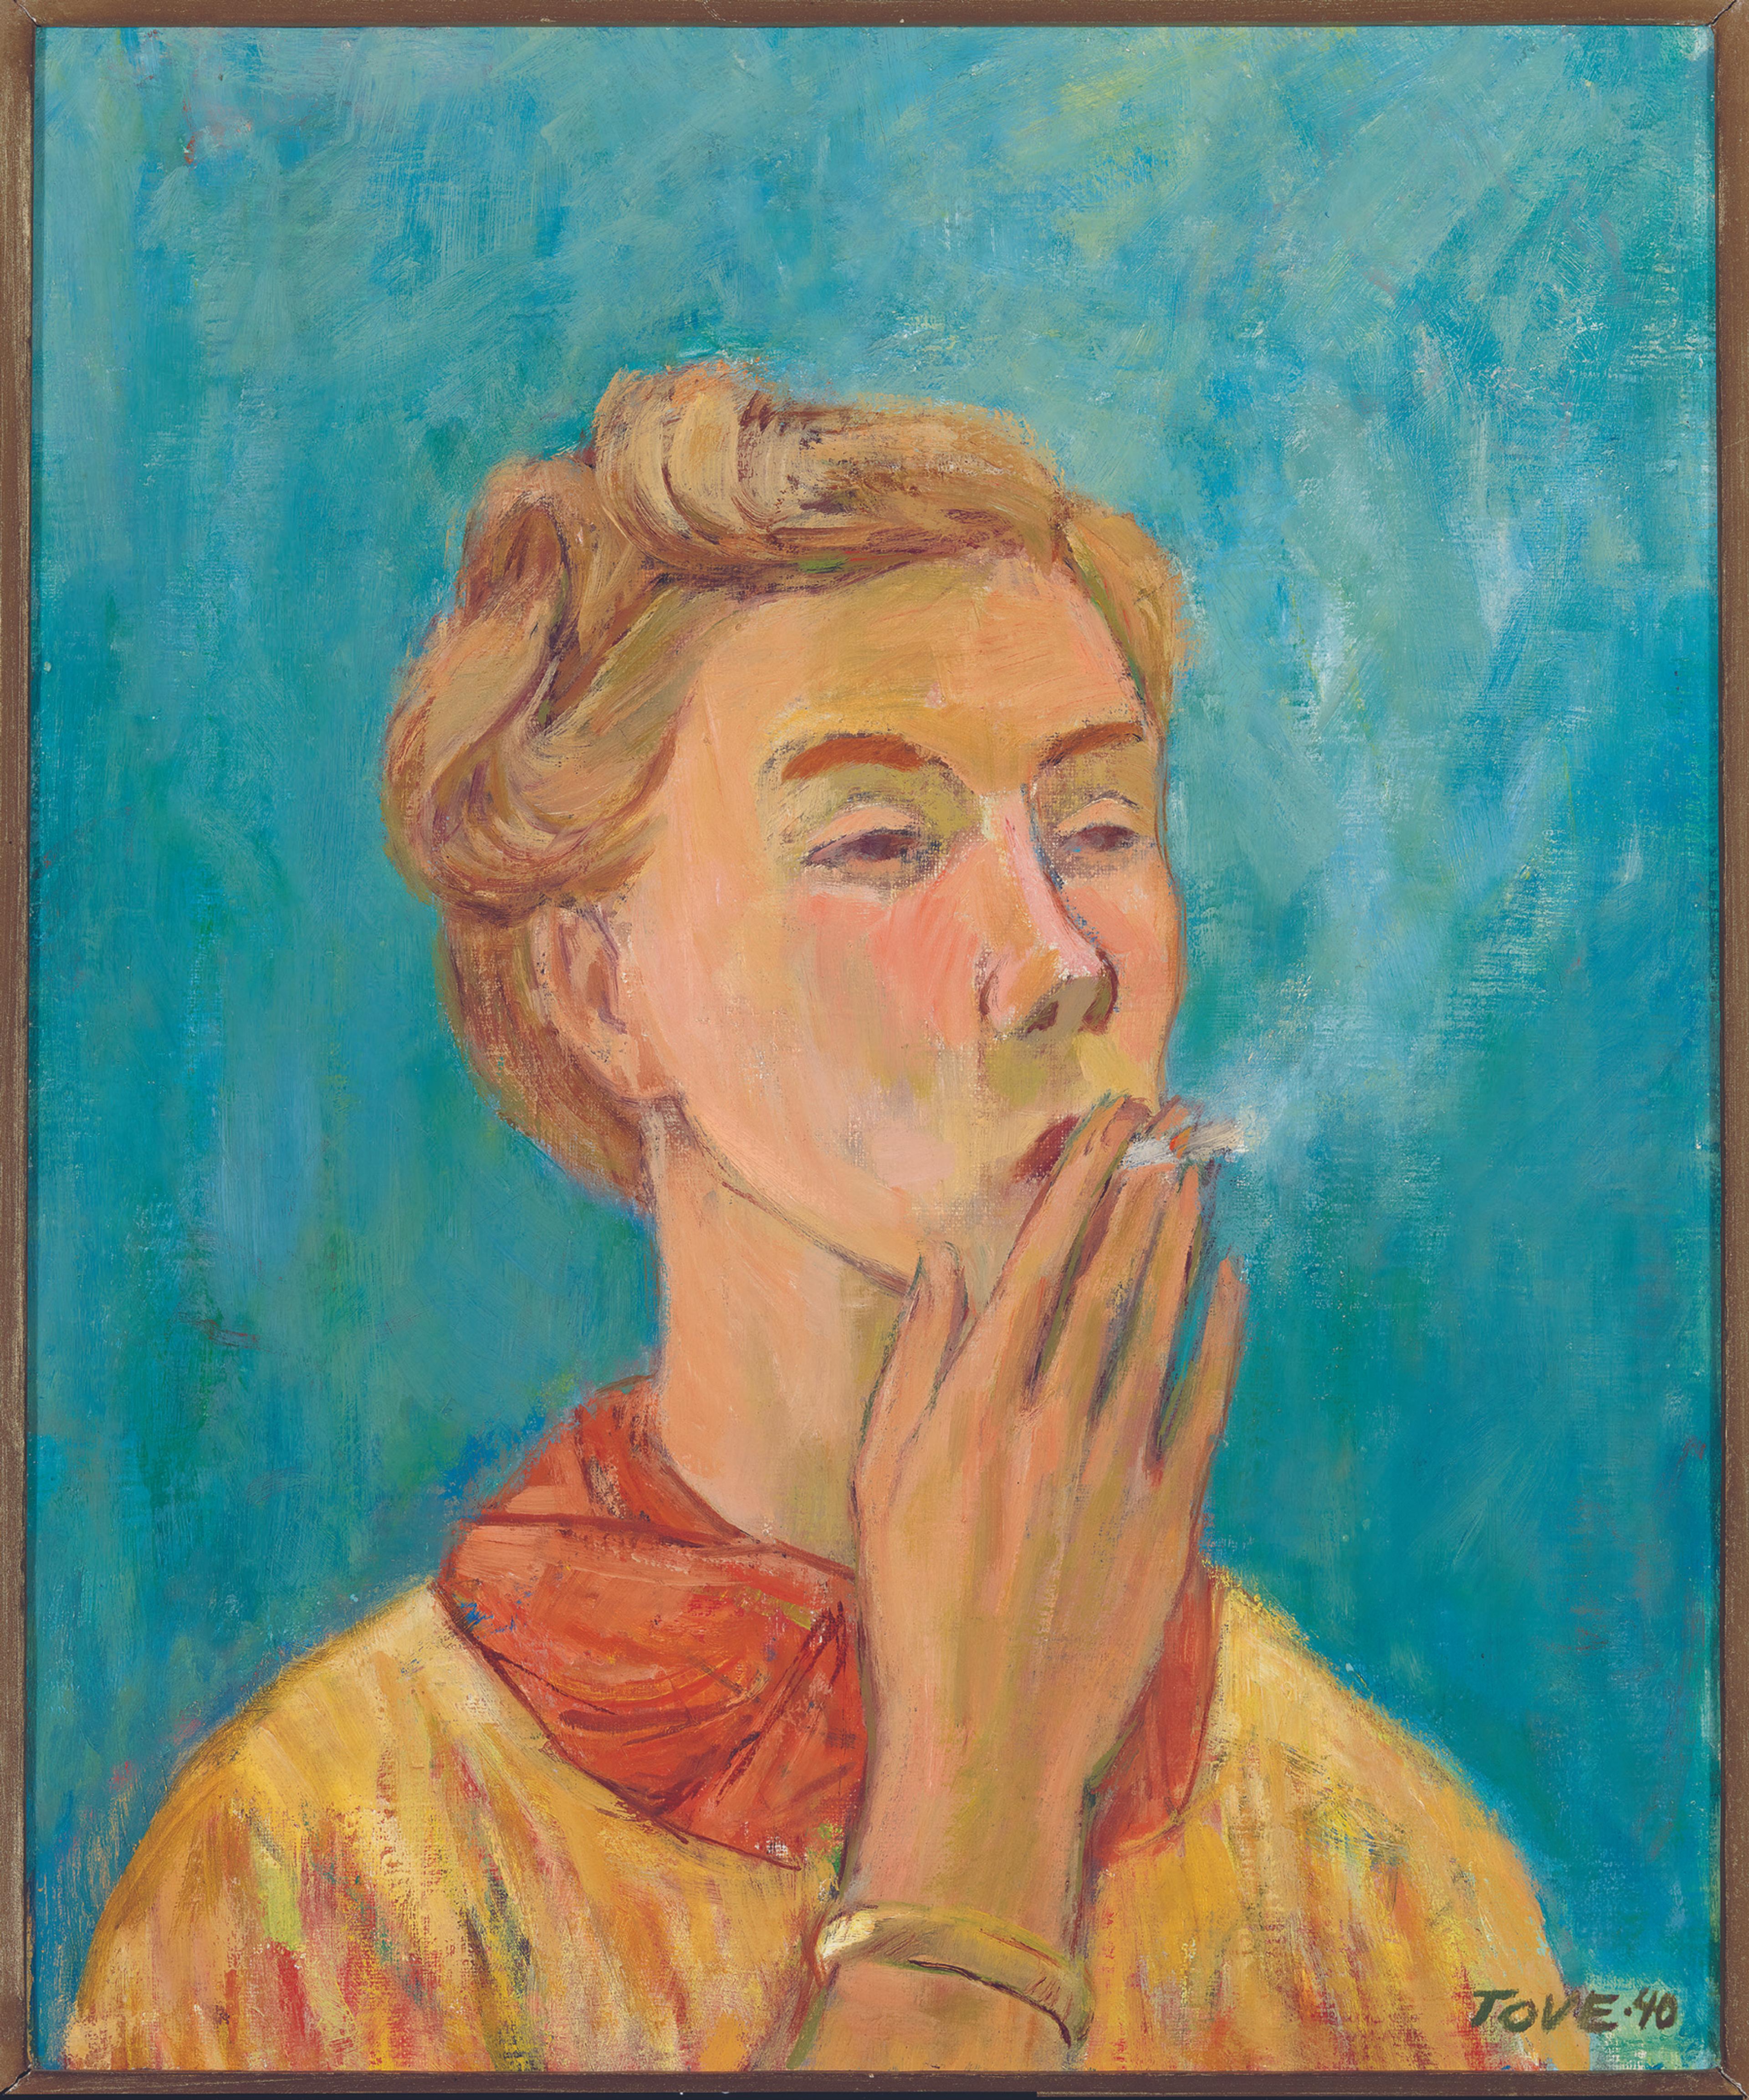 Oil painting of a woman smoking a cigarette against a blue background